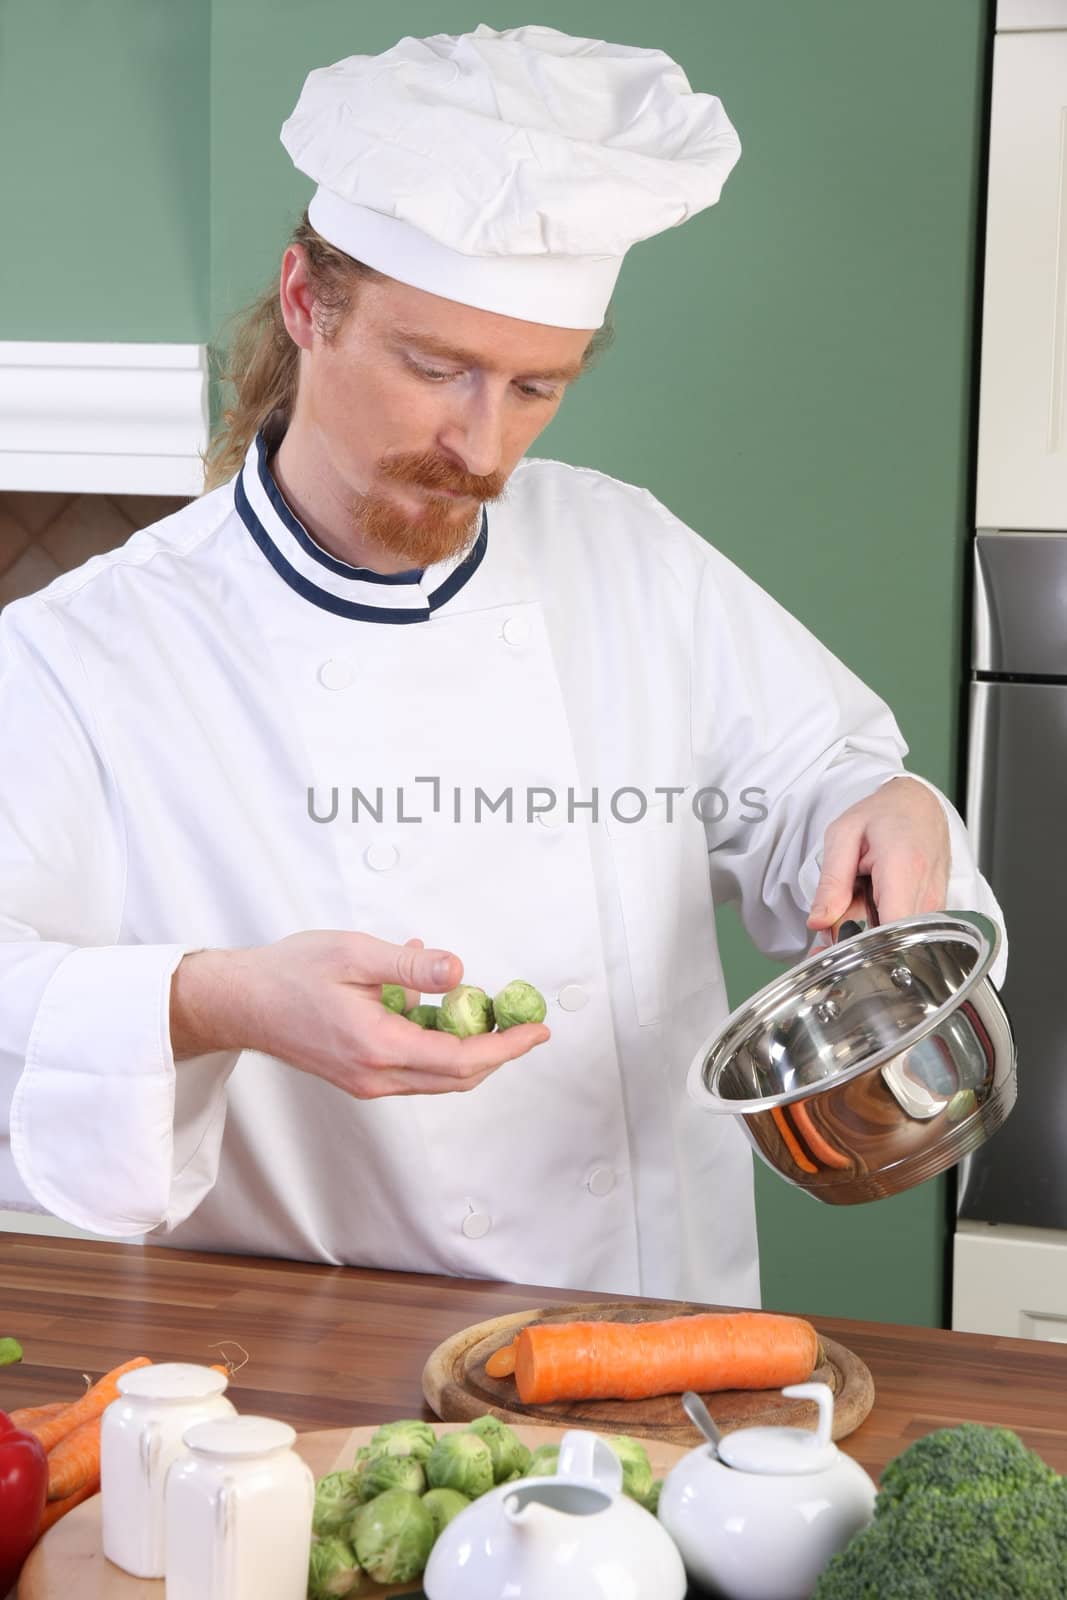 Young Chef with Brussels sprouts, preparing lunch in kitchen